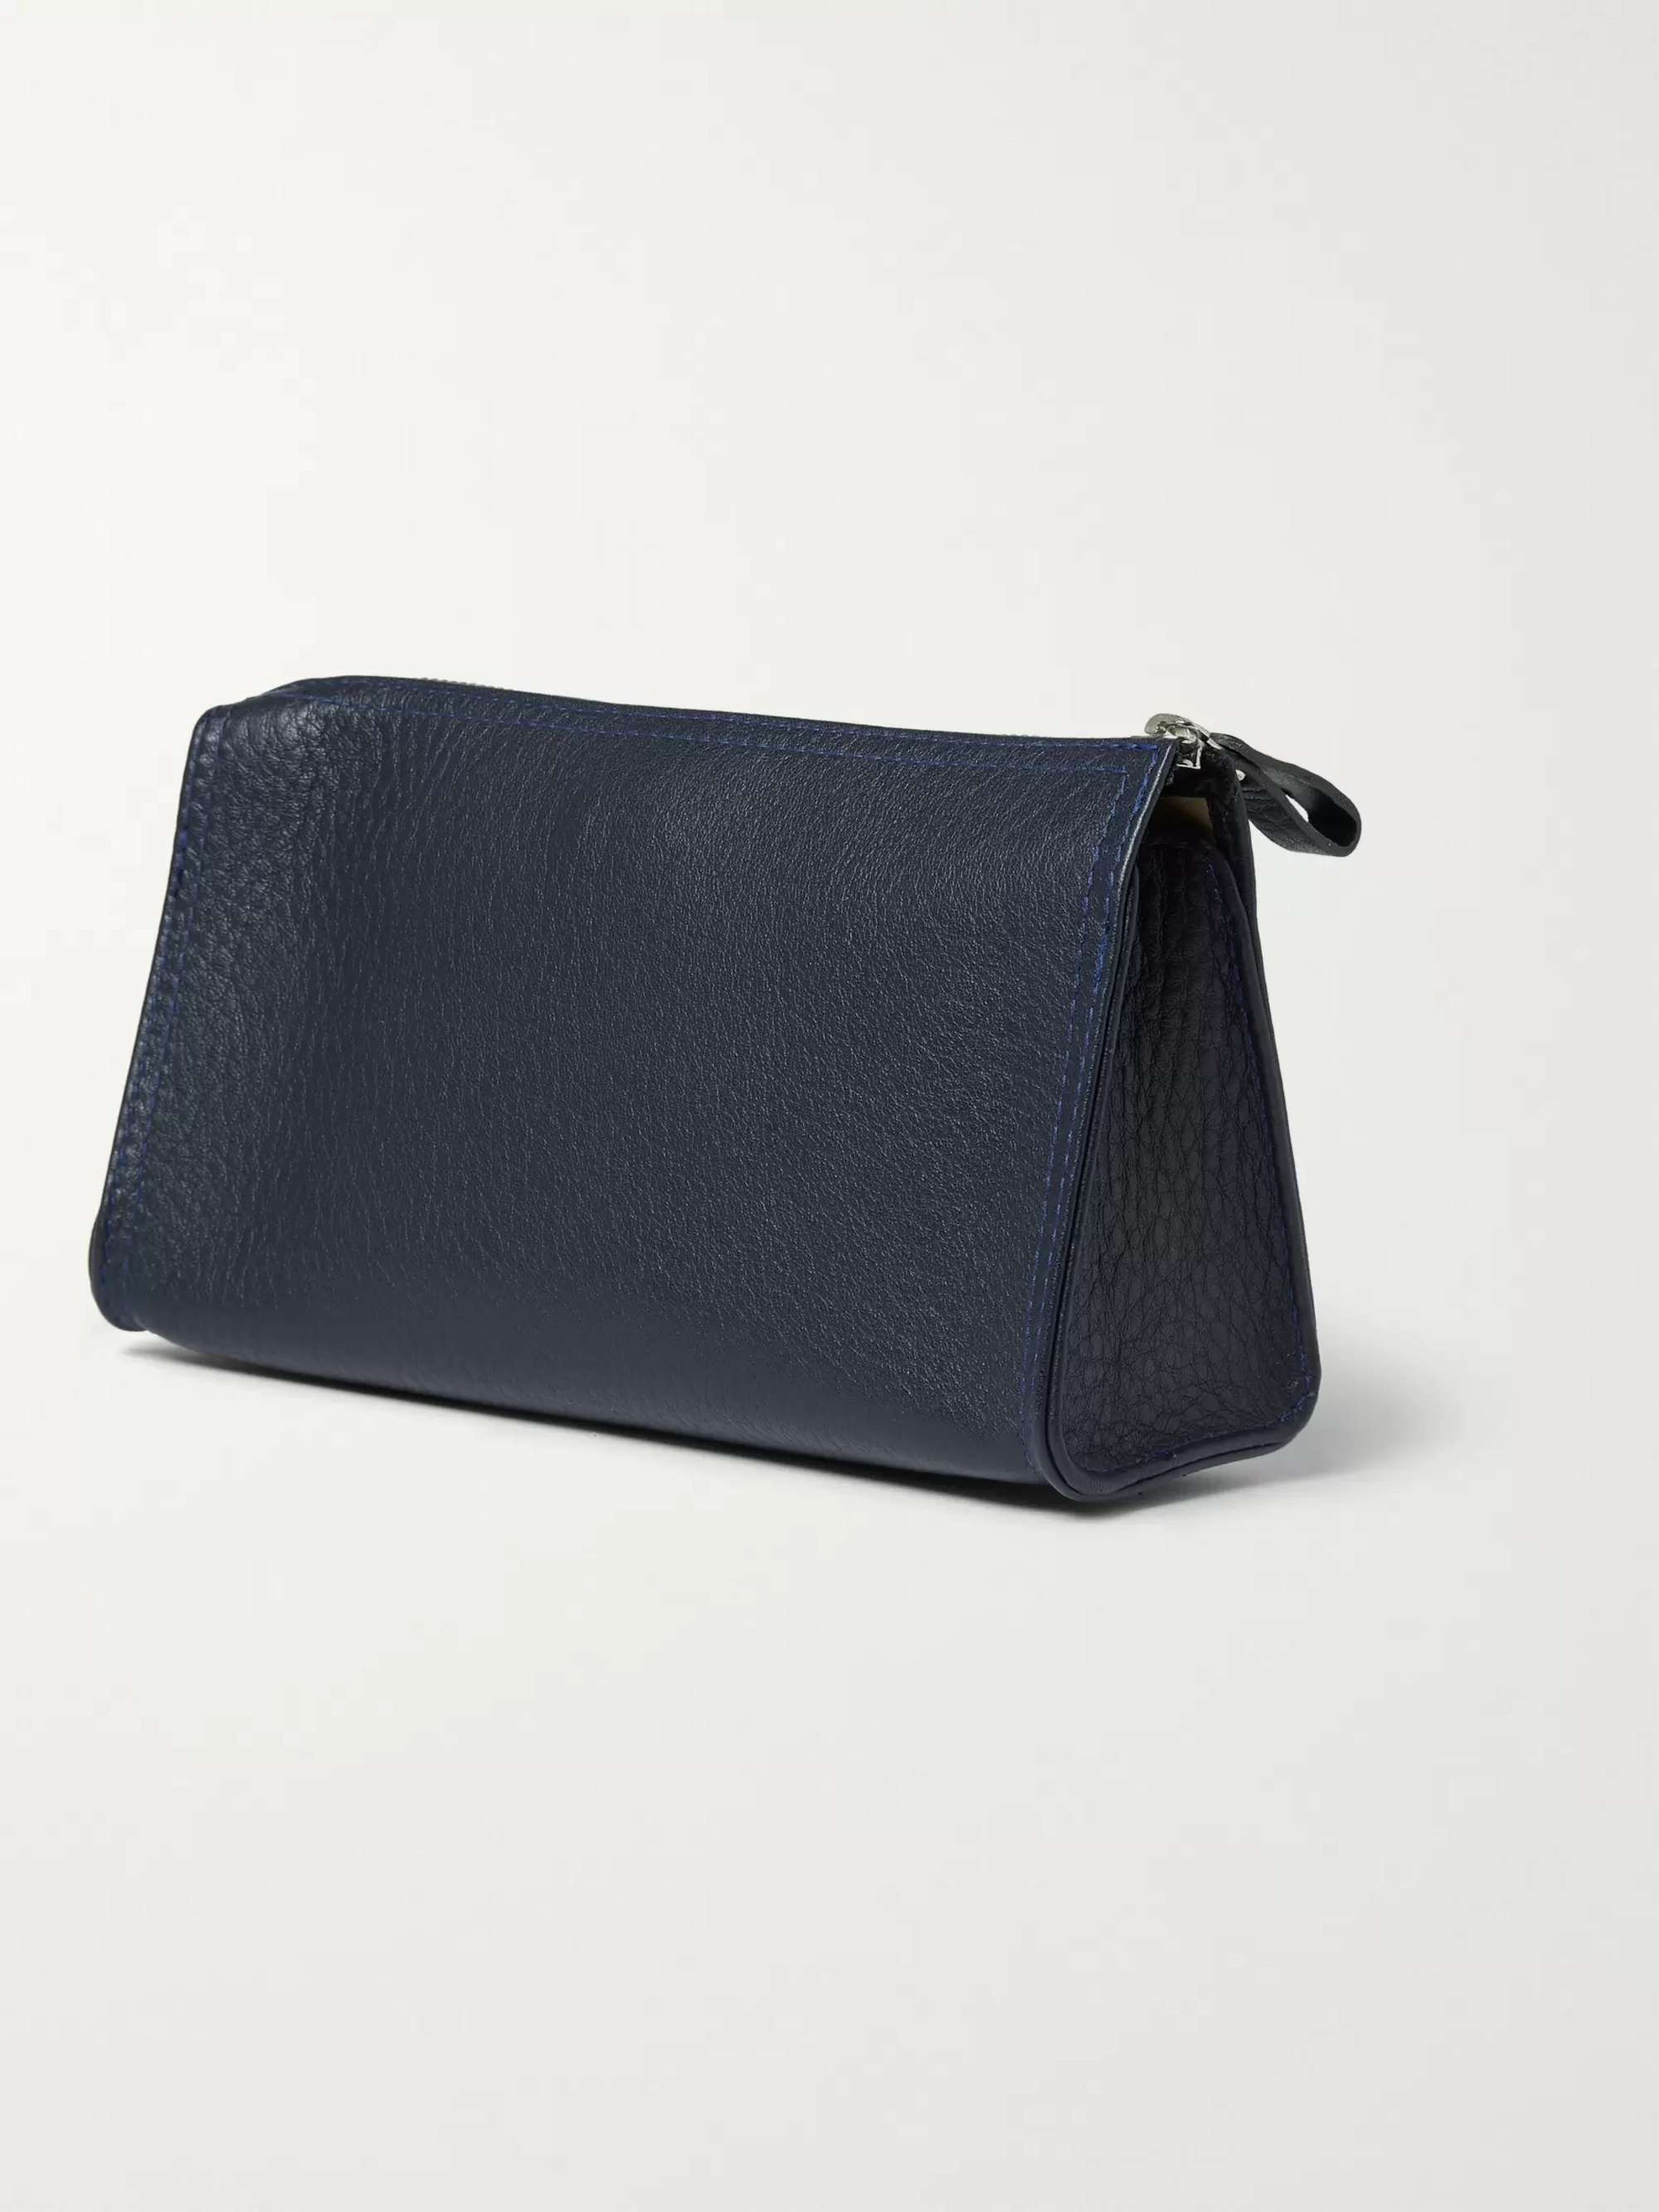 D R Harris Grained-Leather Wash Bag